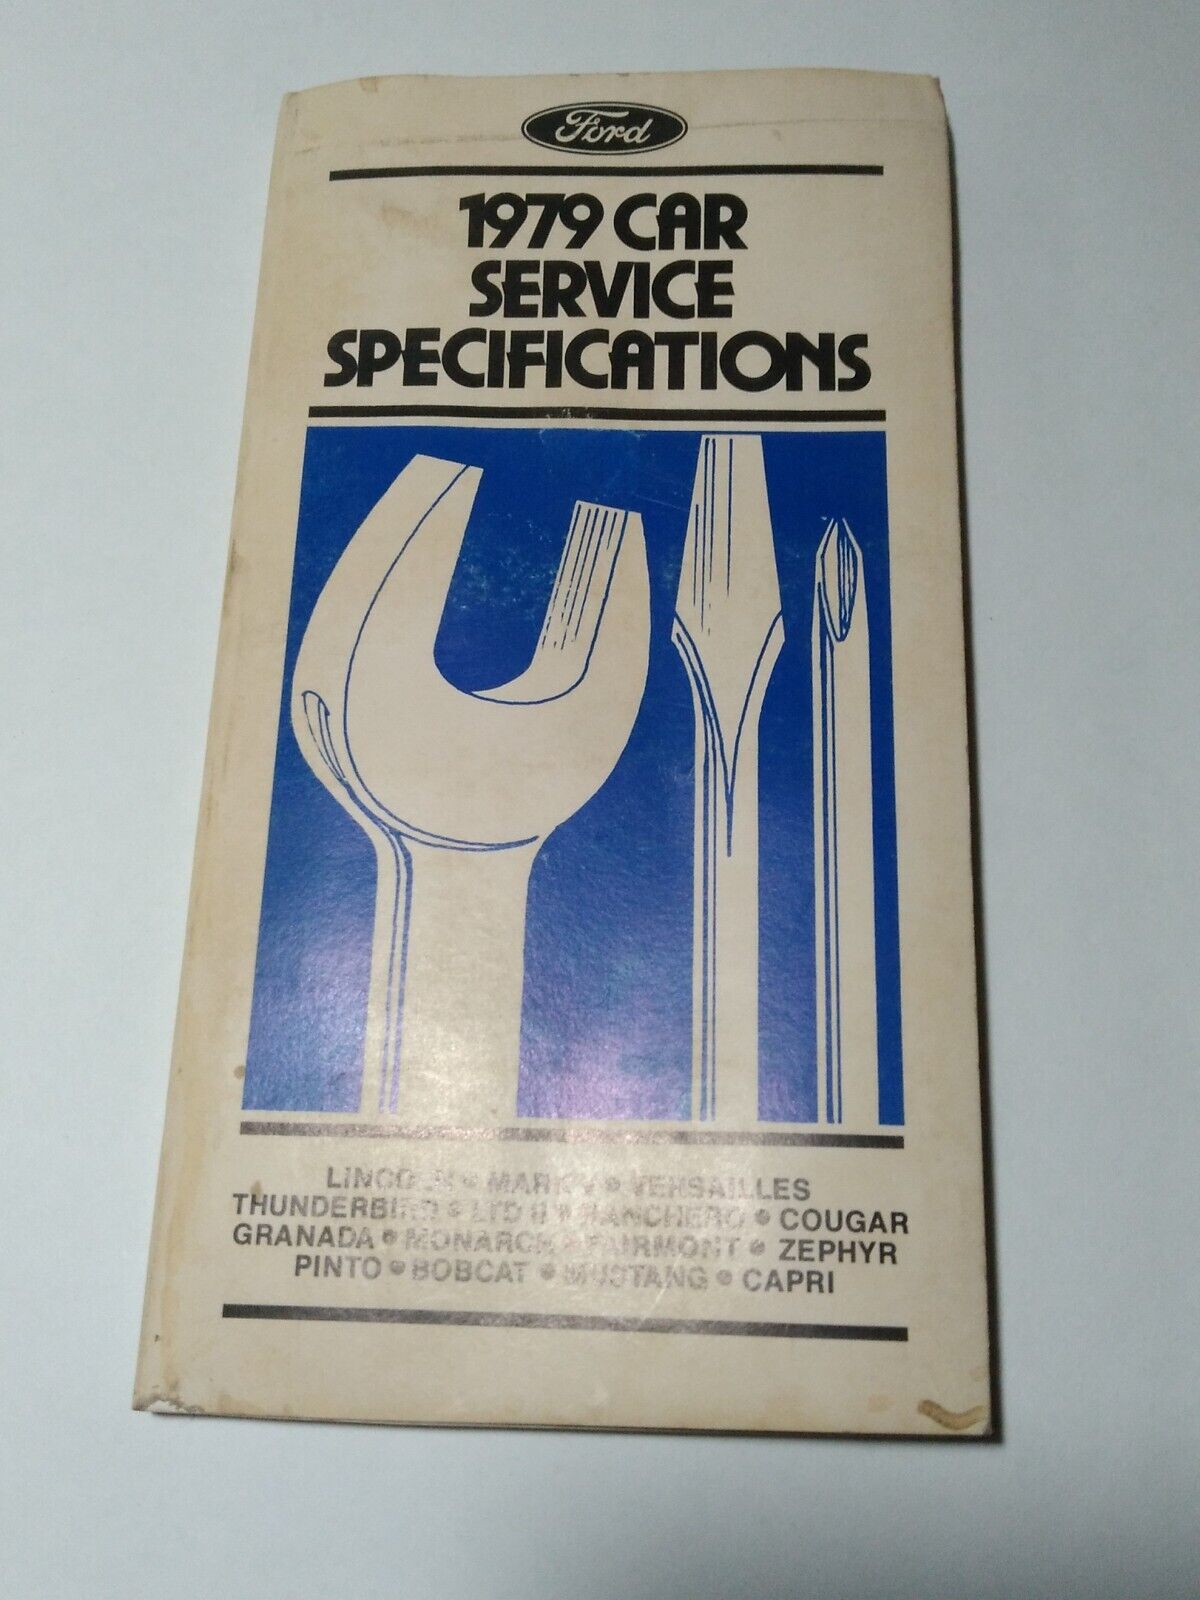 Vintage 1979 Ford Car Service Specifications Booklet MUSTANG THUNDERBIRD PINTO